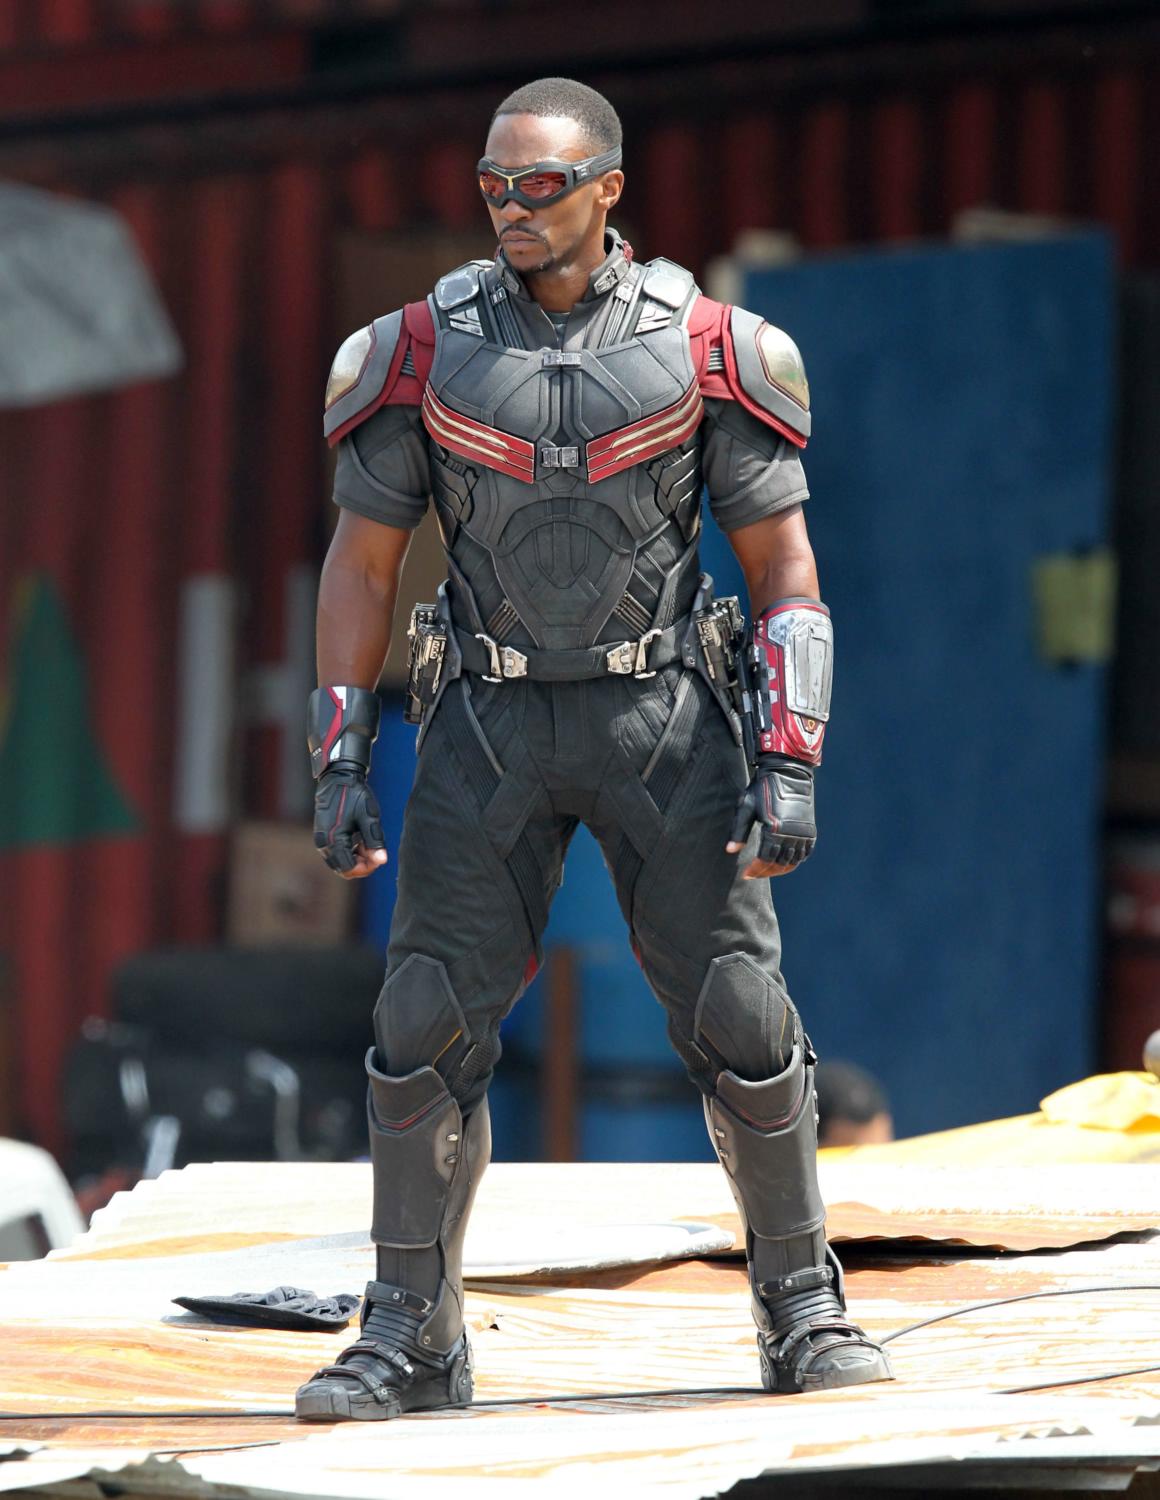 Chris Evans and Anthony Mackie Filming Captain America: Civil War